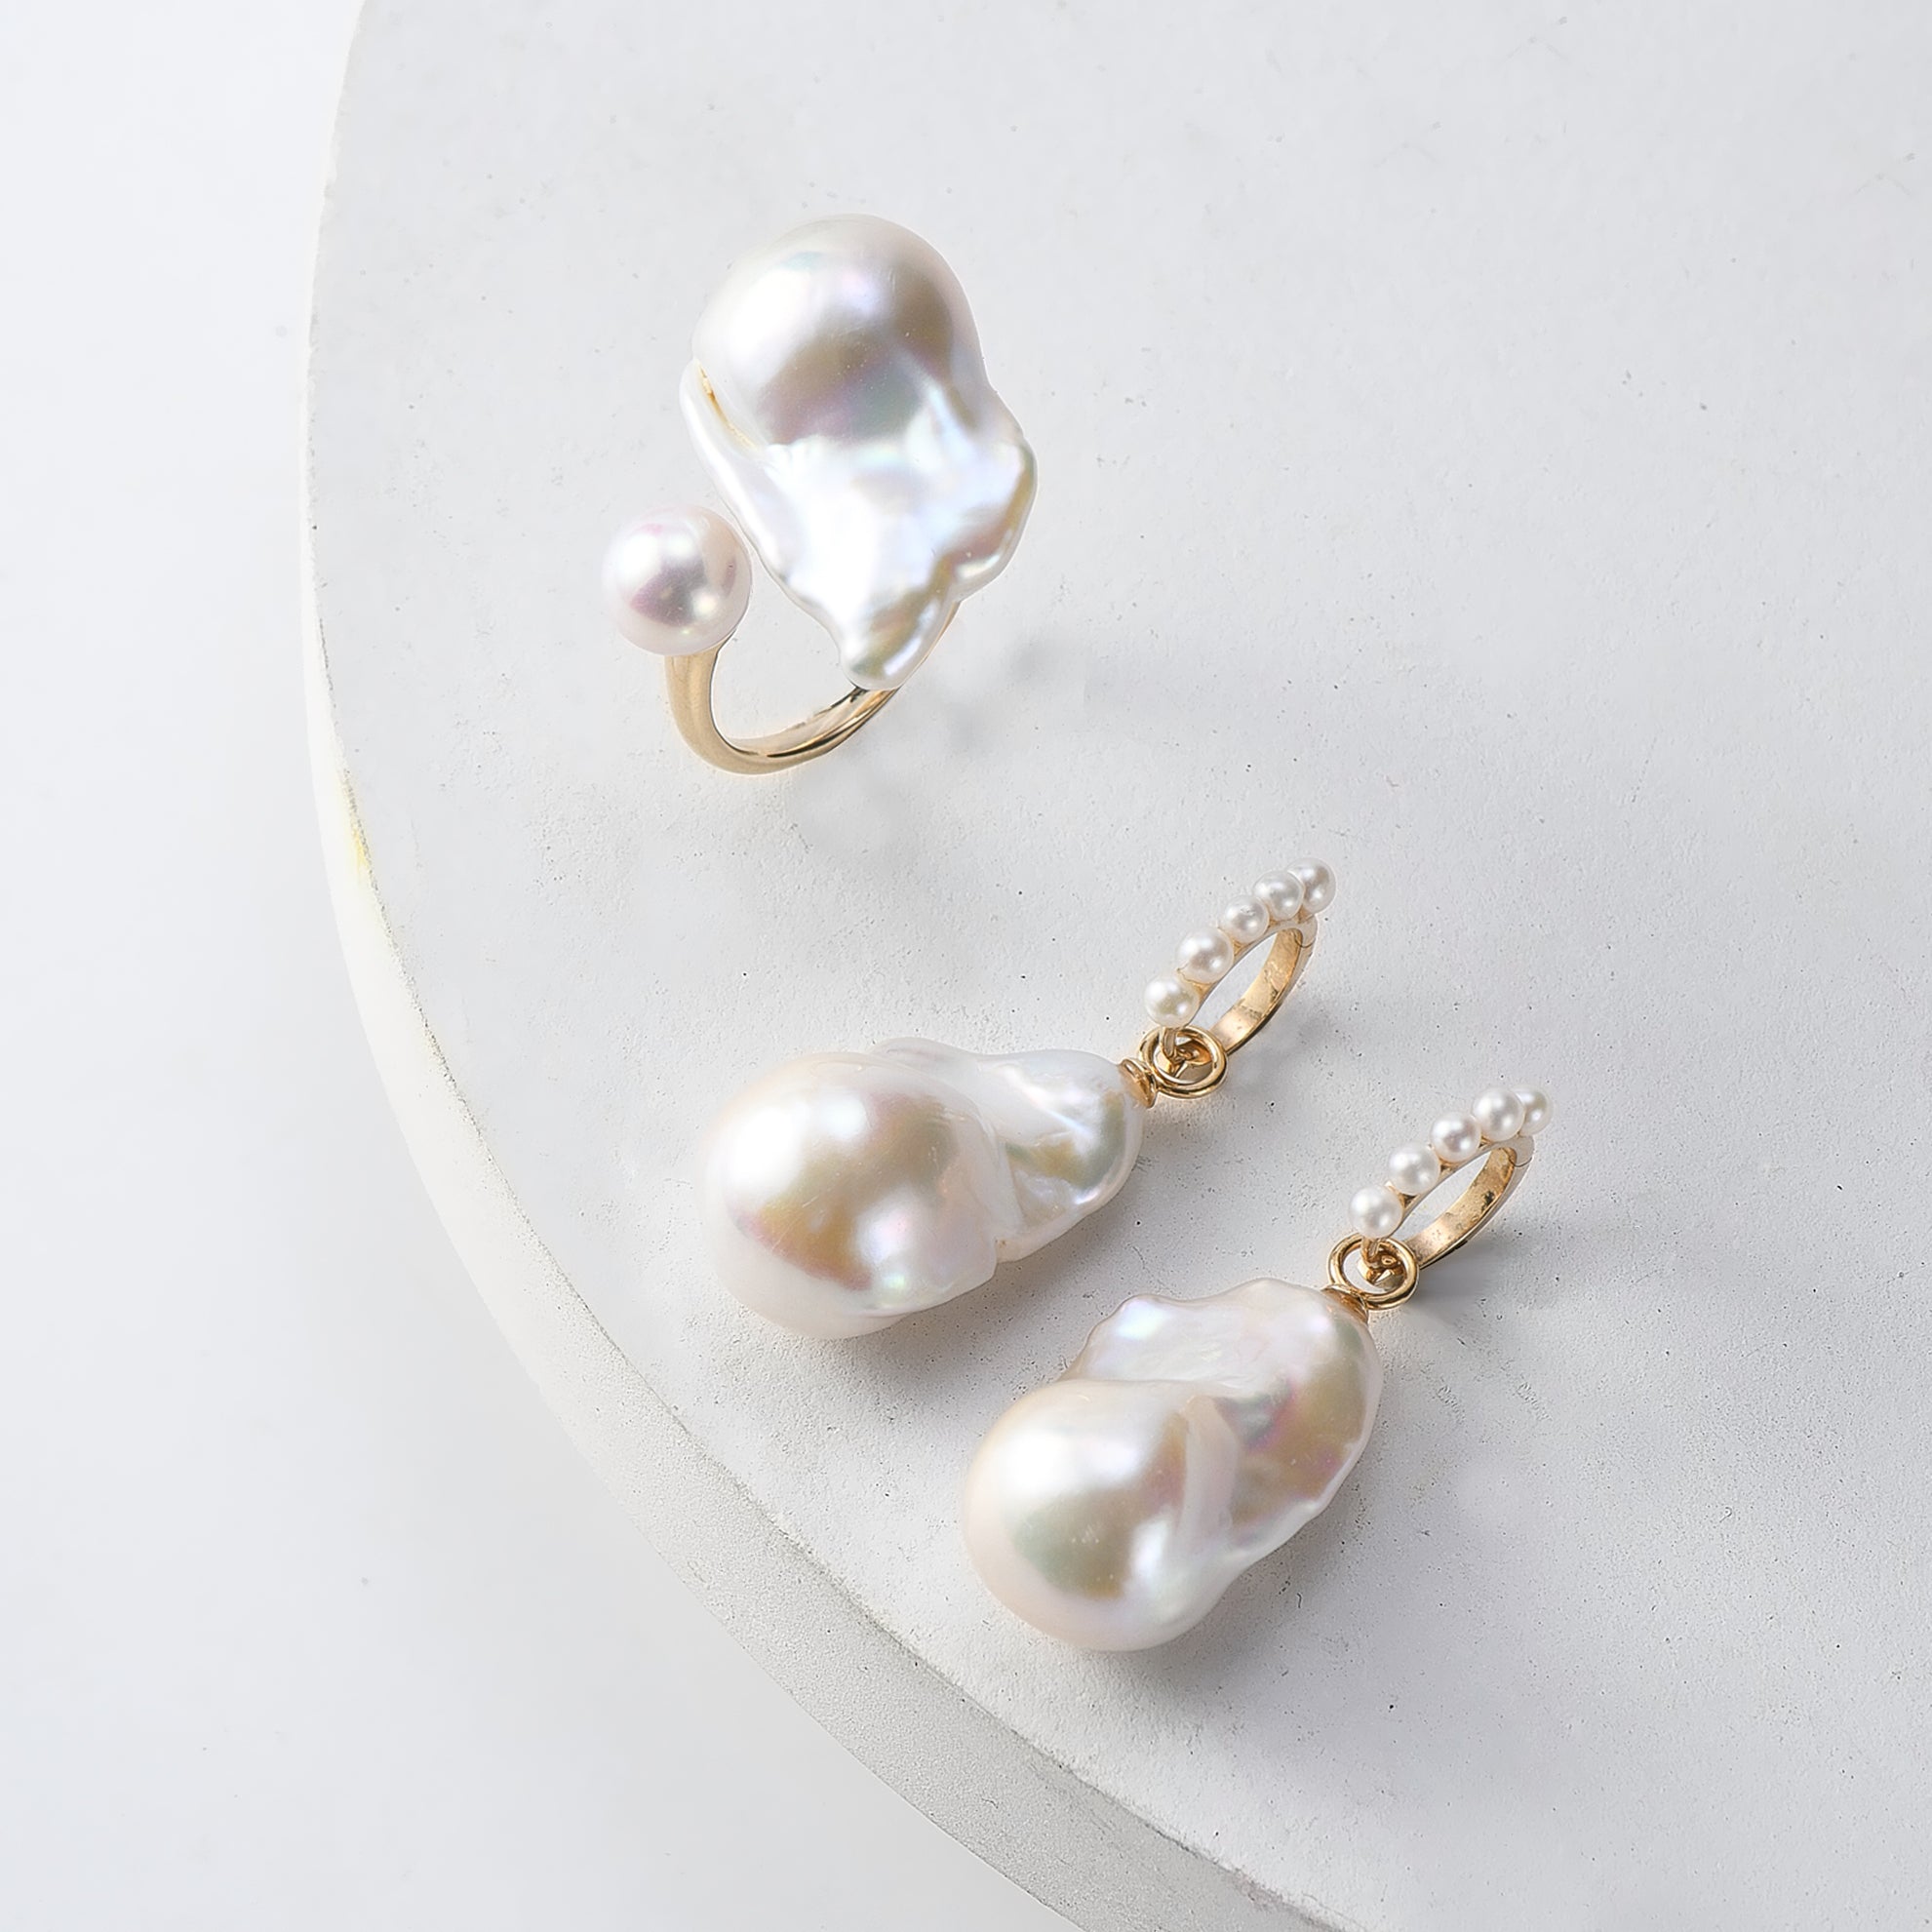 Flat lay image of baroque pearl ring and baroque pearl earrings